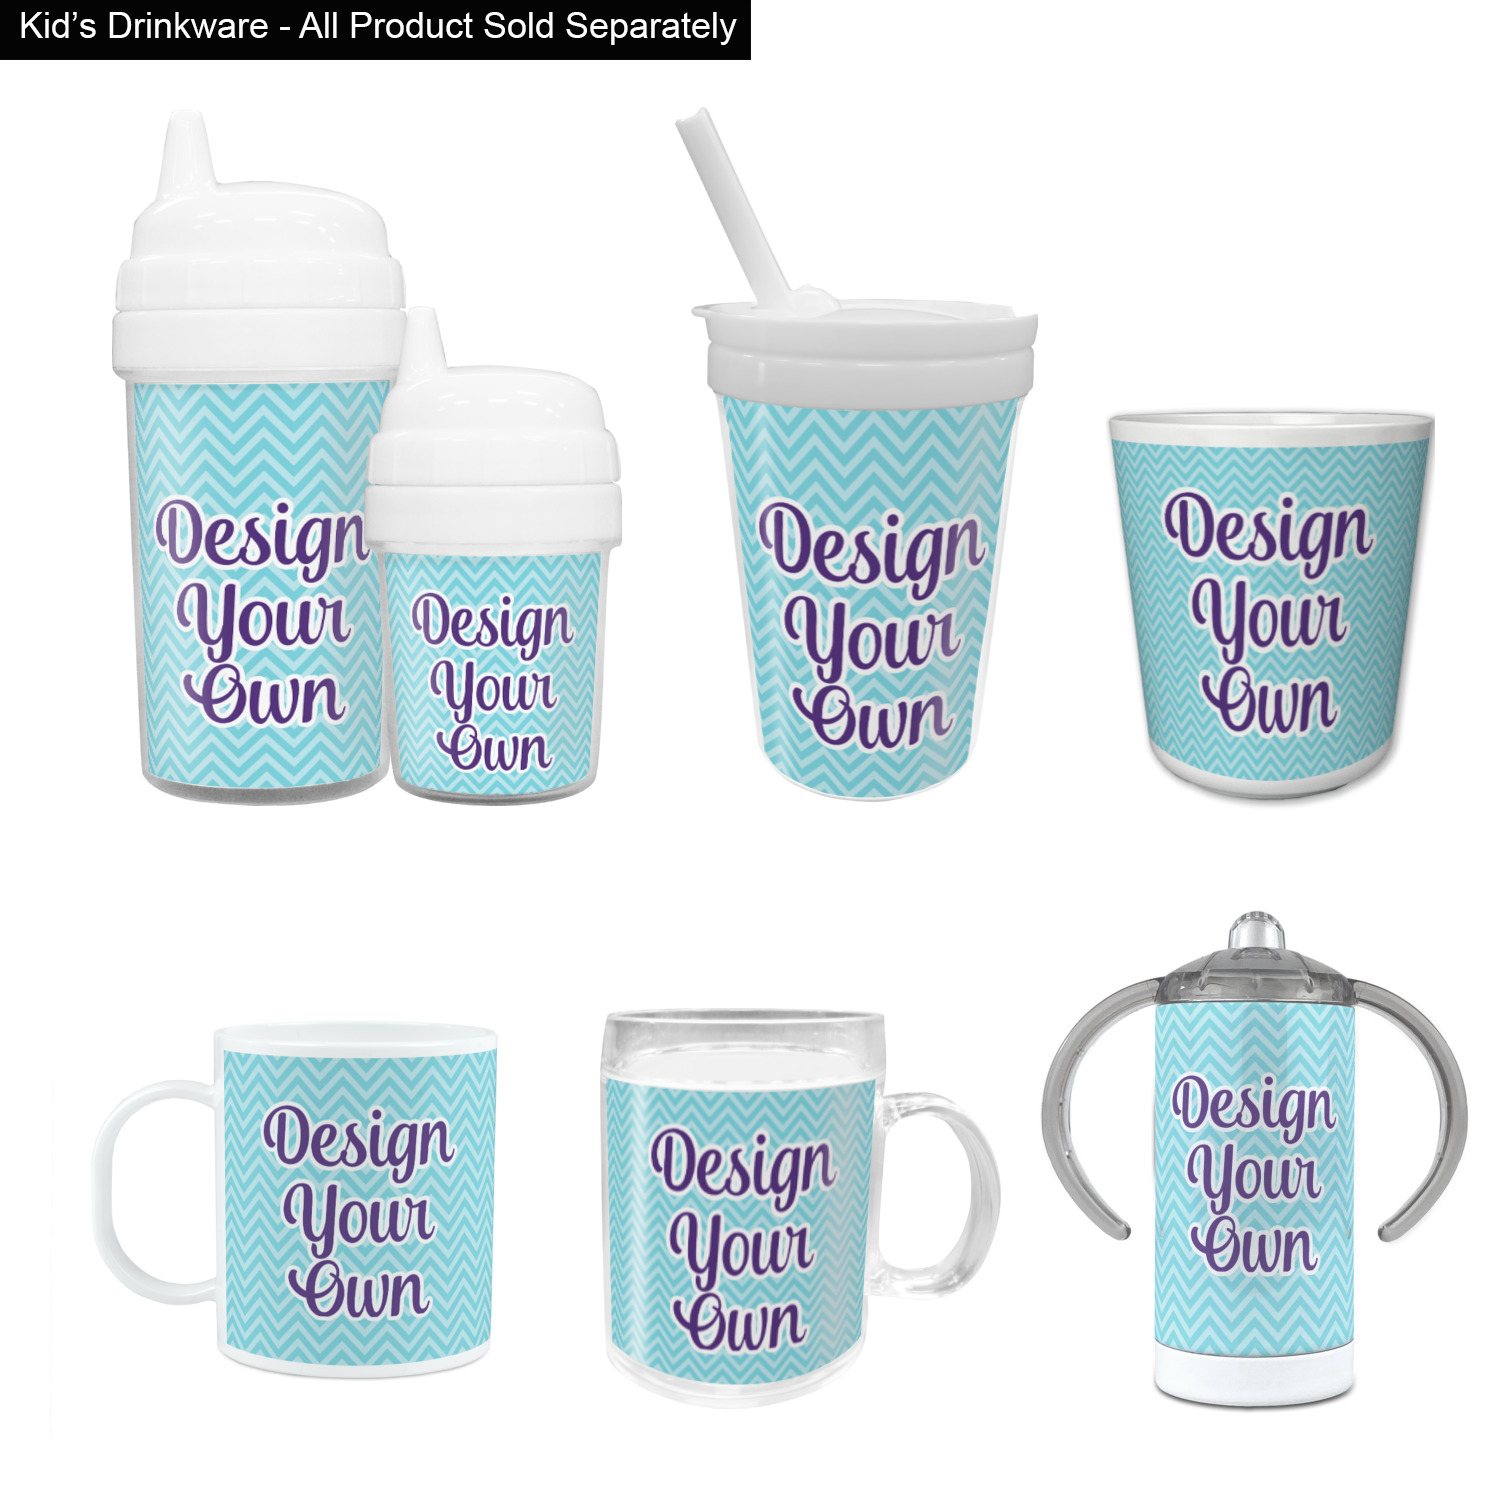 https://www.youcustomizeit.com/common/MAKE/965833/Design-Your-Own-Kid-Drinkware-Customized-Personalized.jpg?lm=1672249935